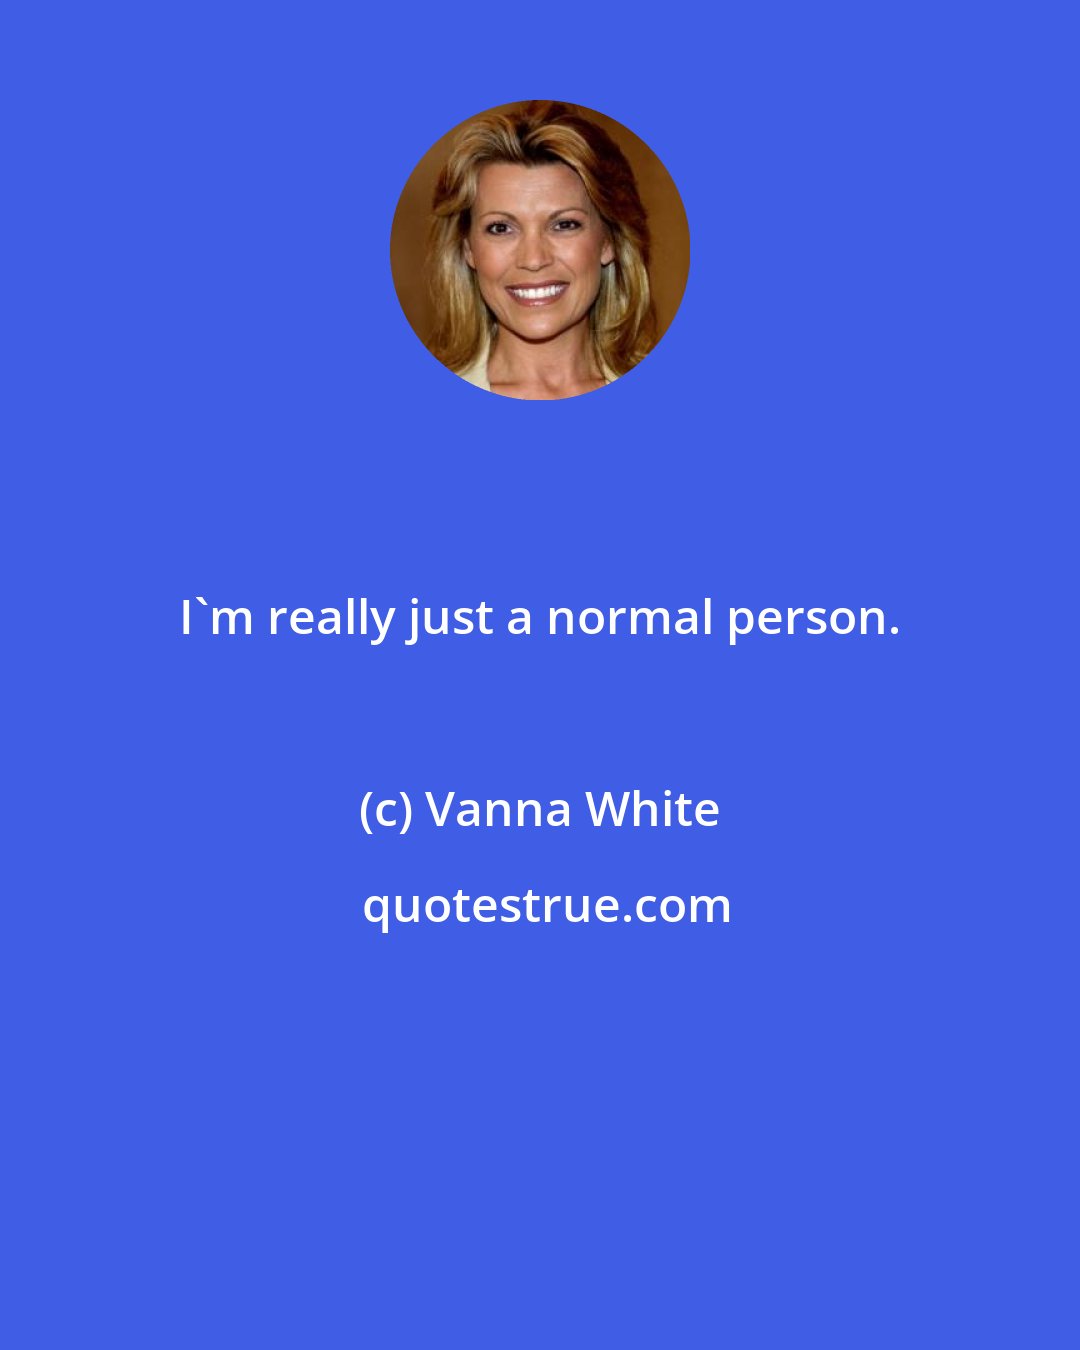 Vanna White: I'm really just a normal person.